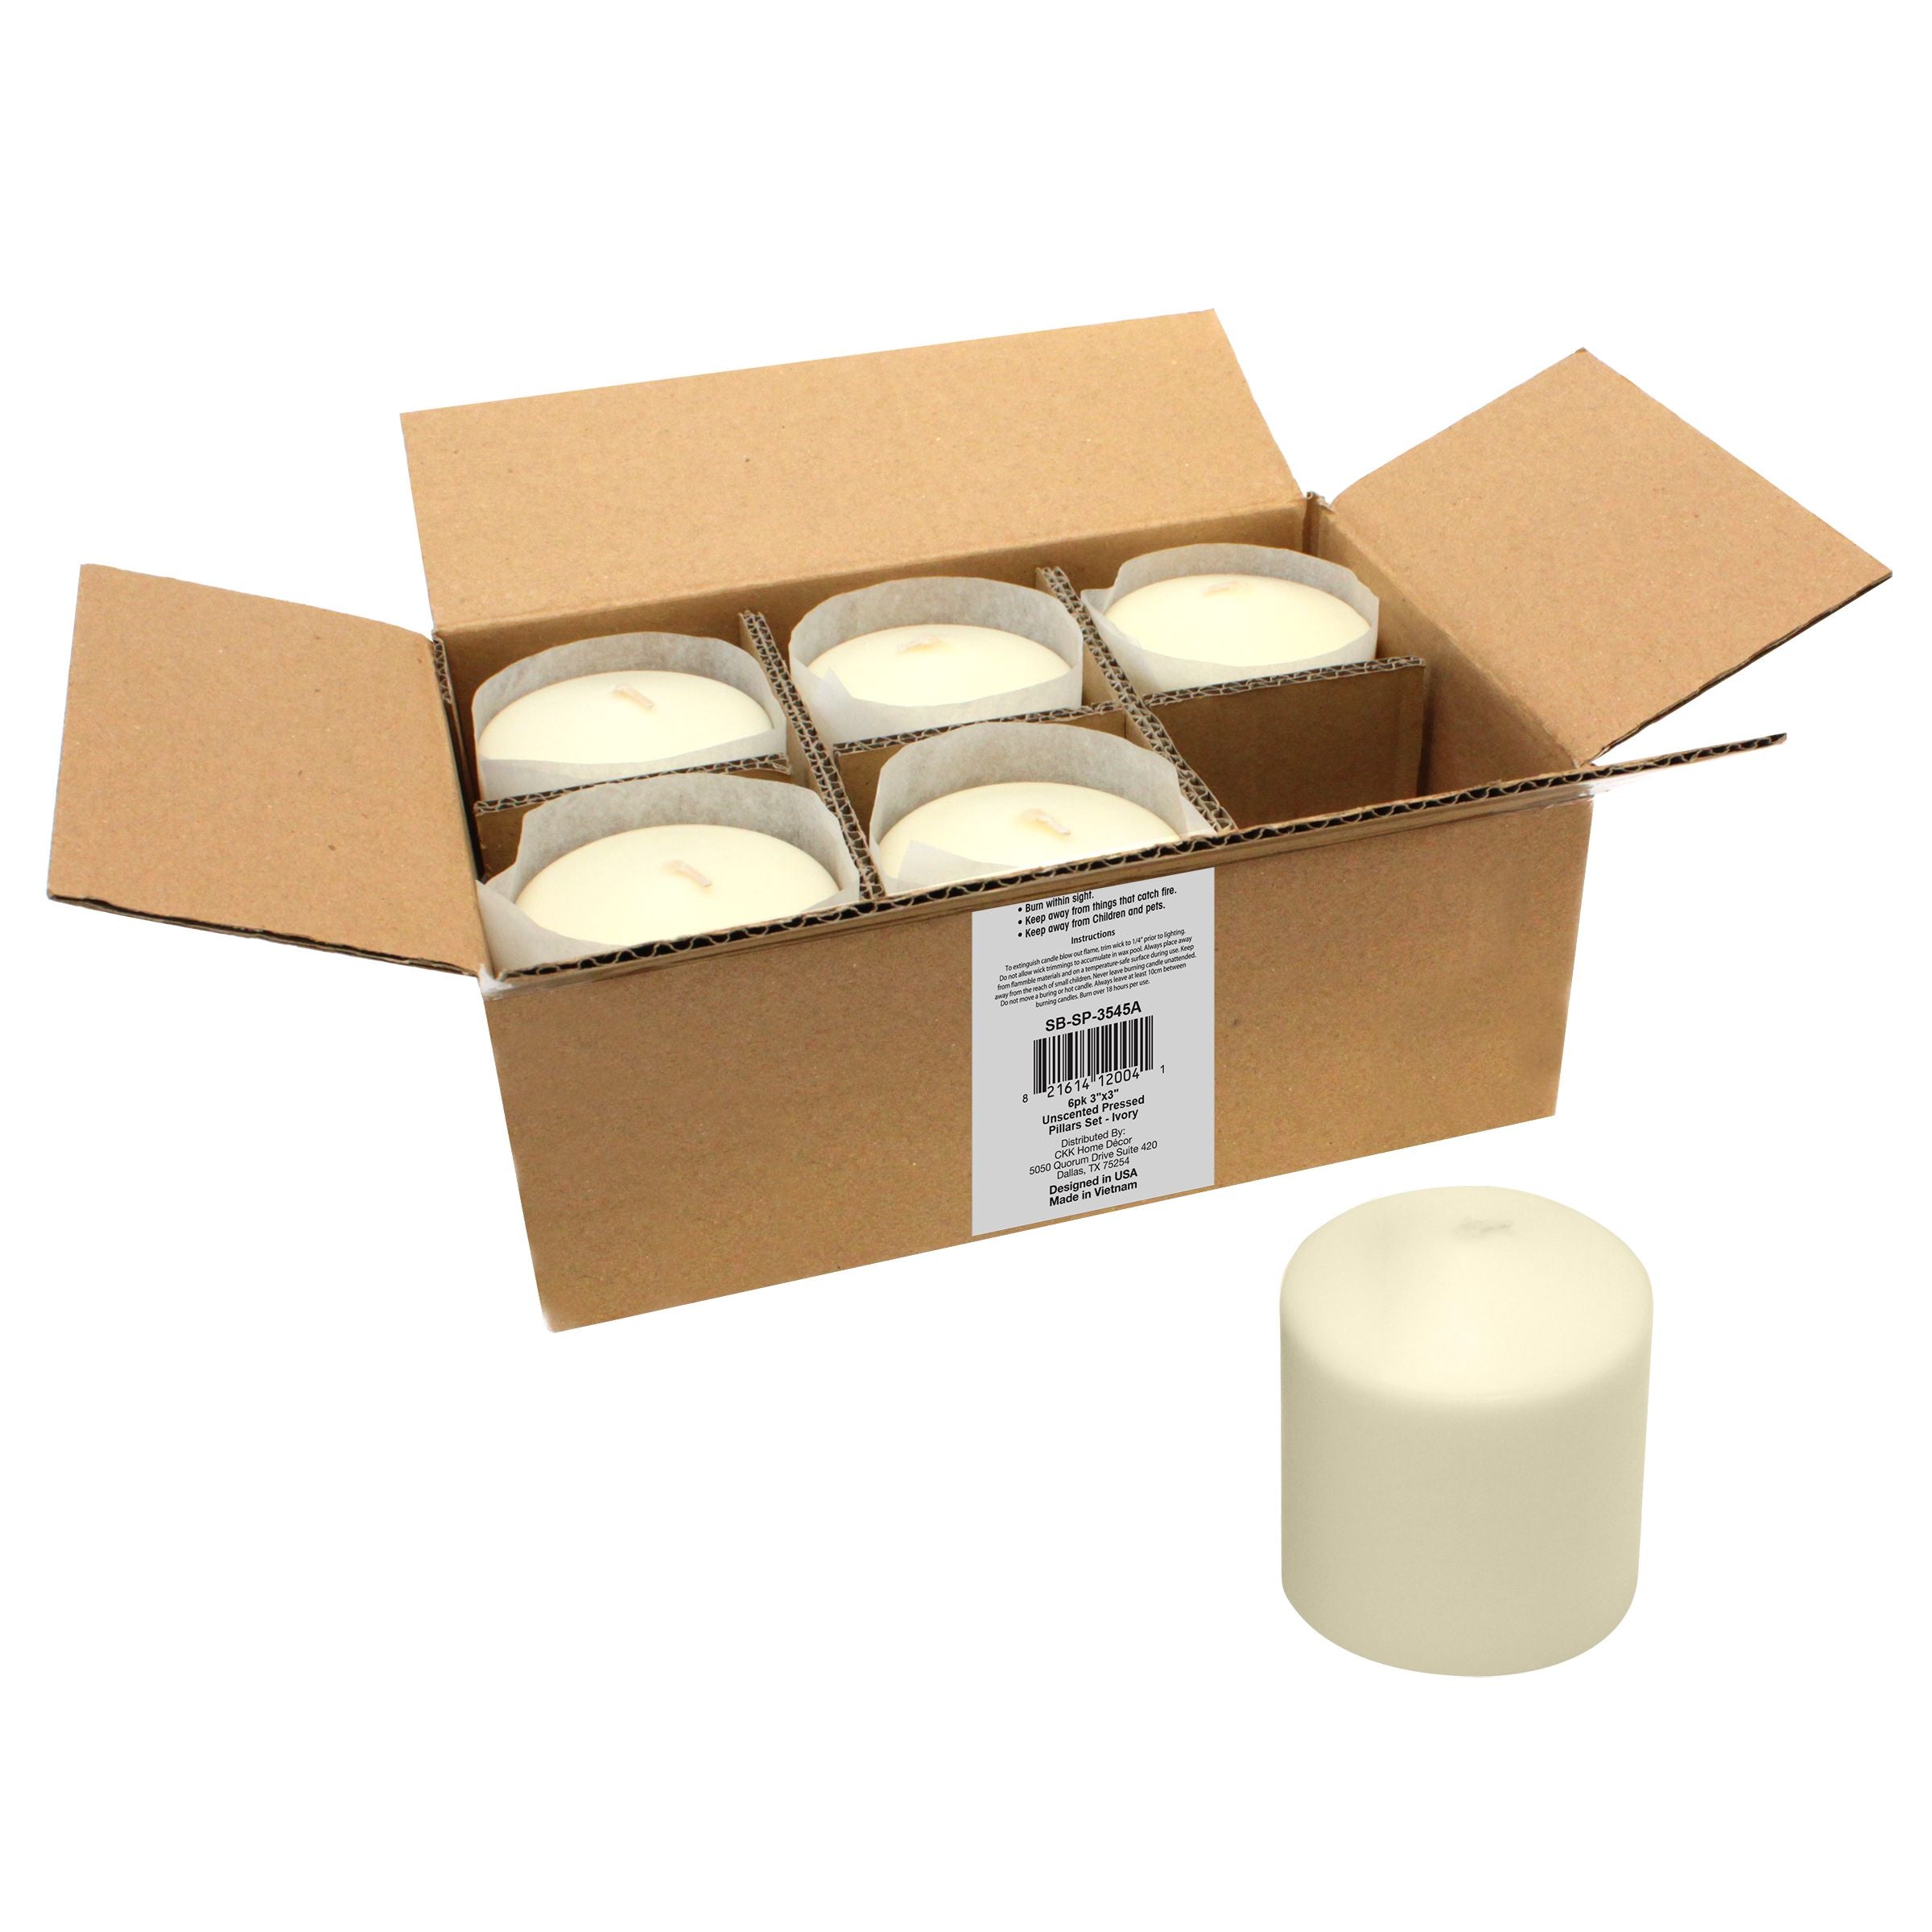 3 x 3 Unscented Ivory Pillar Candles, Set of 6